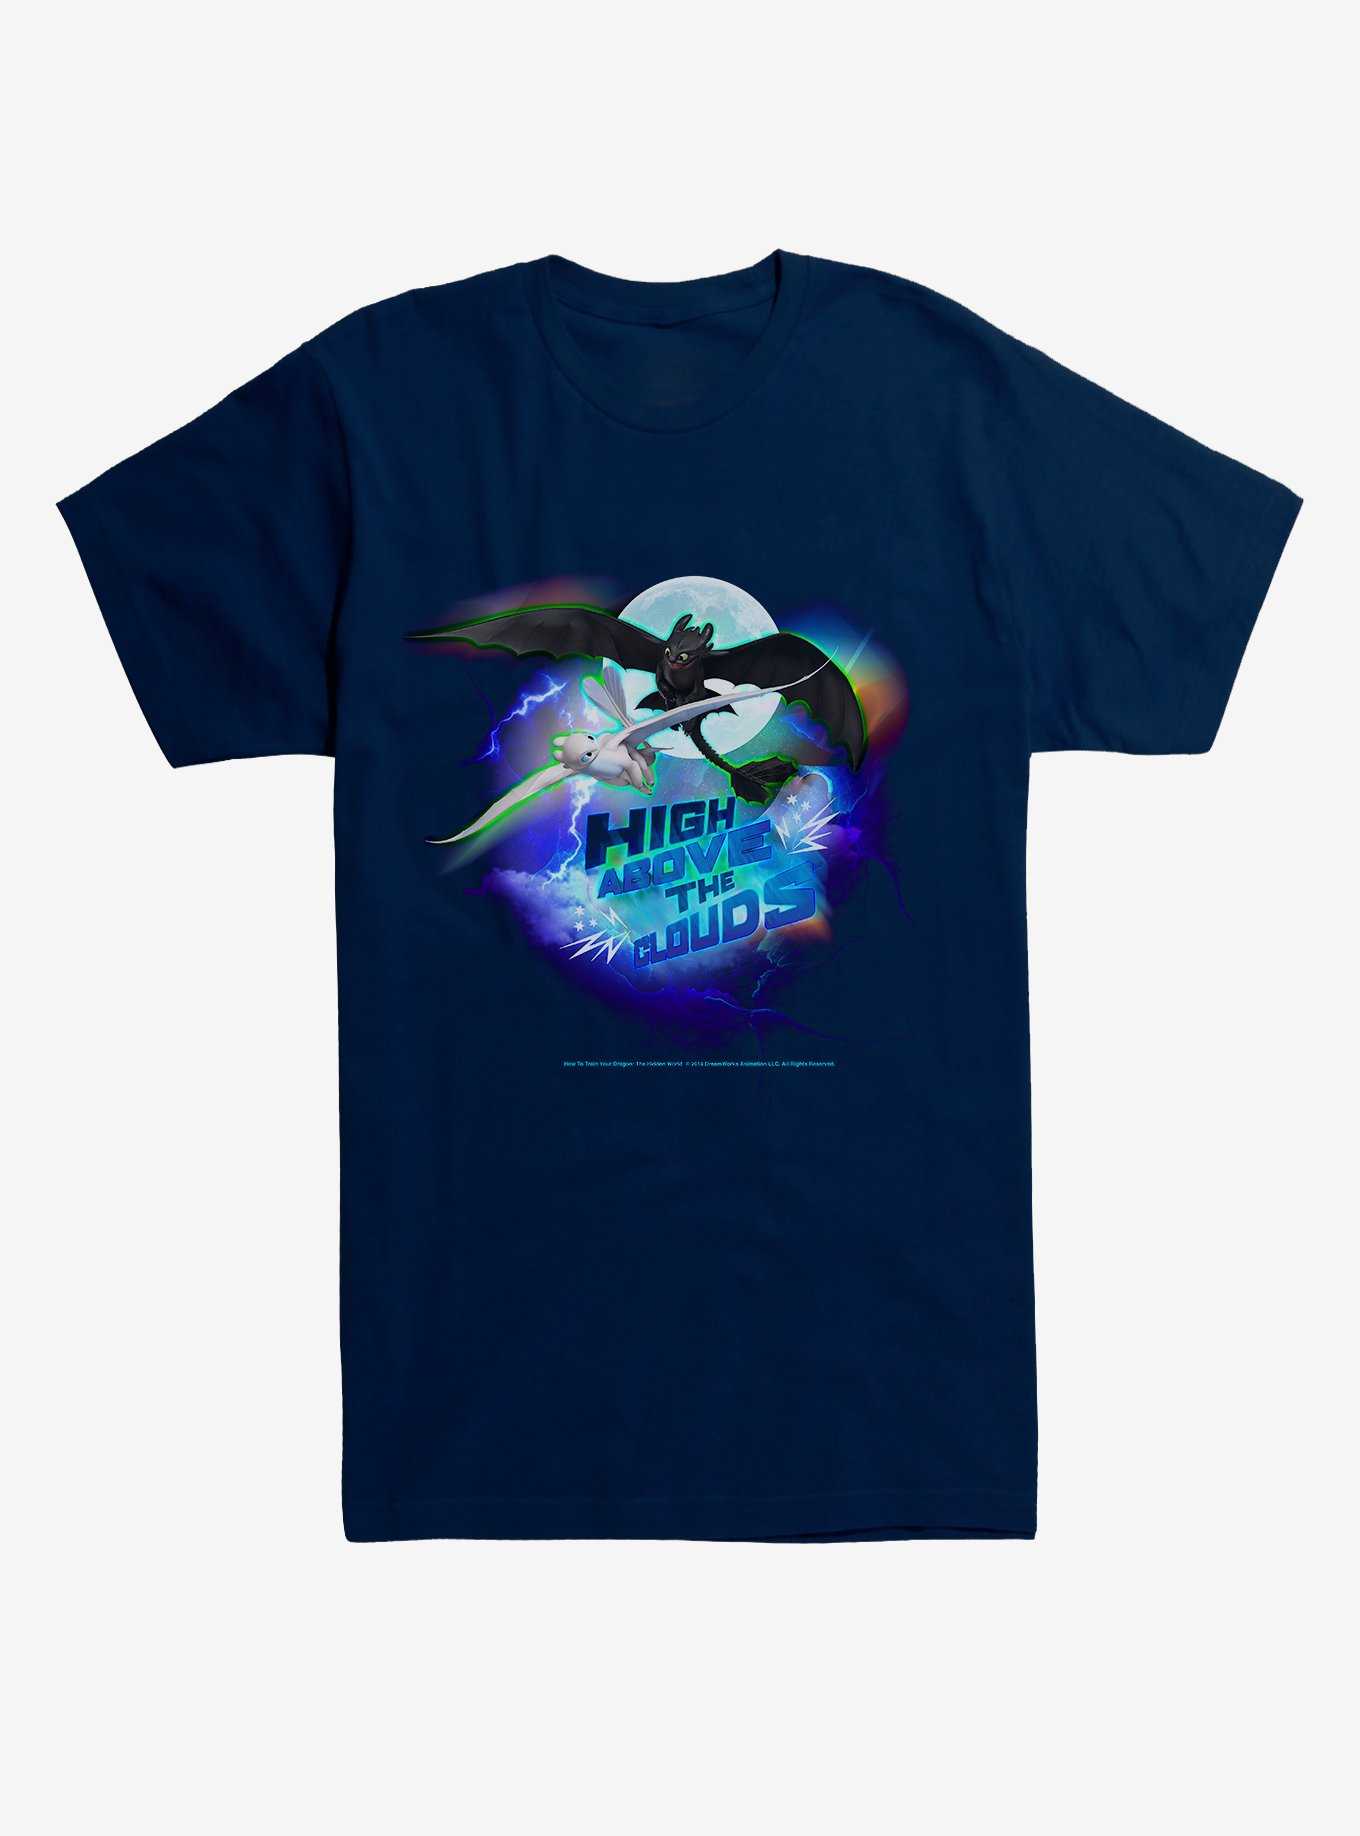 How To Train Your Dragon Hight Above the Clouds T-Shirt, , hi-res